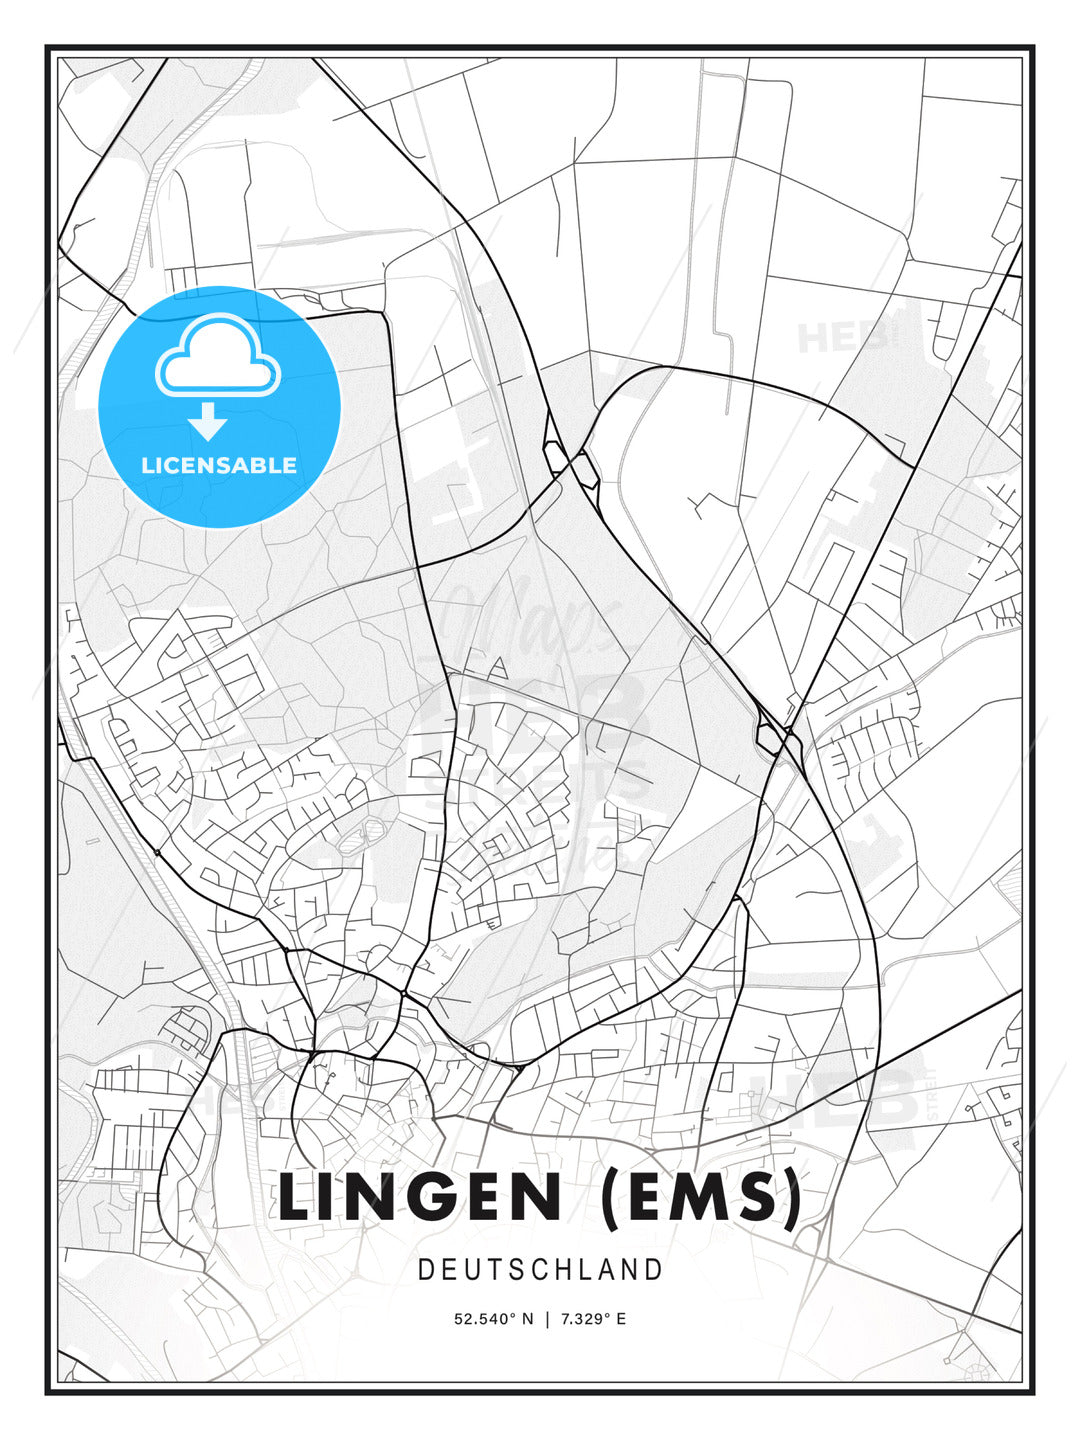 Lingen (Ems), Germany, Modern Print Template in Various Formats - HEBSTREITS Sketches